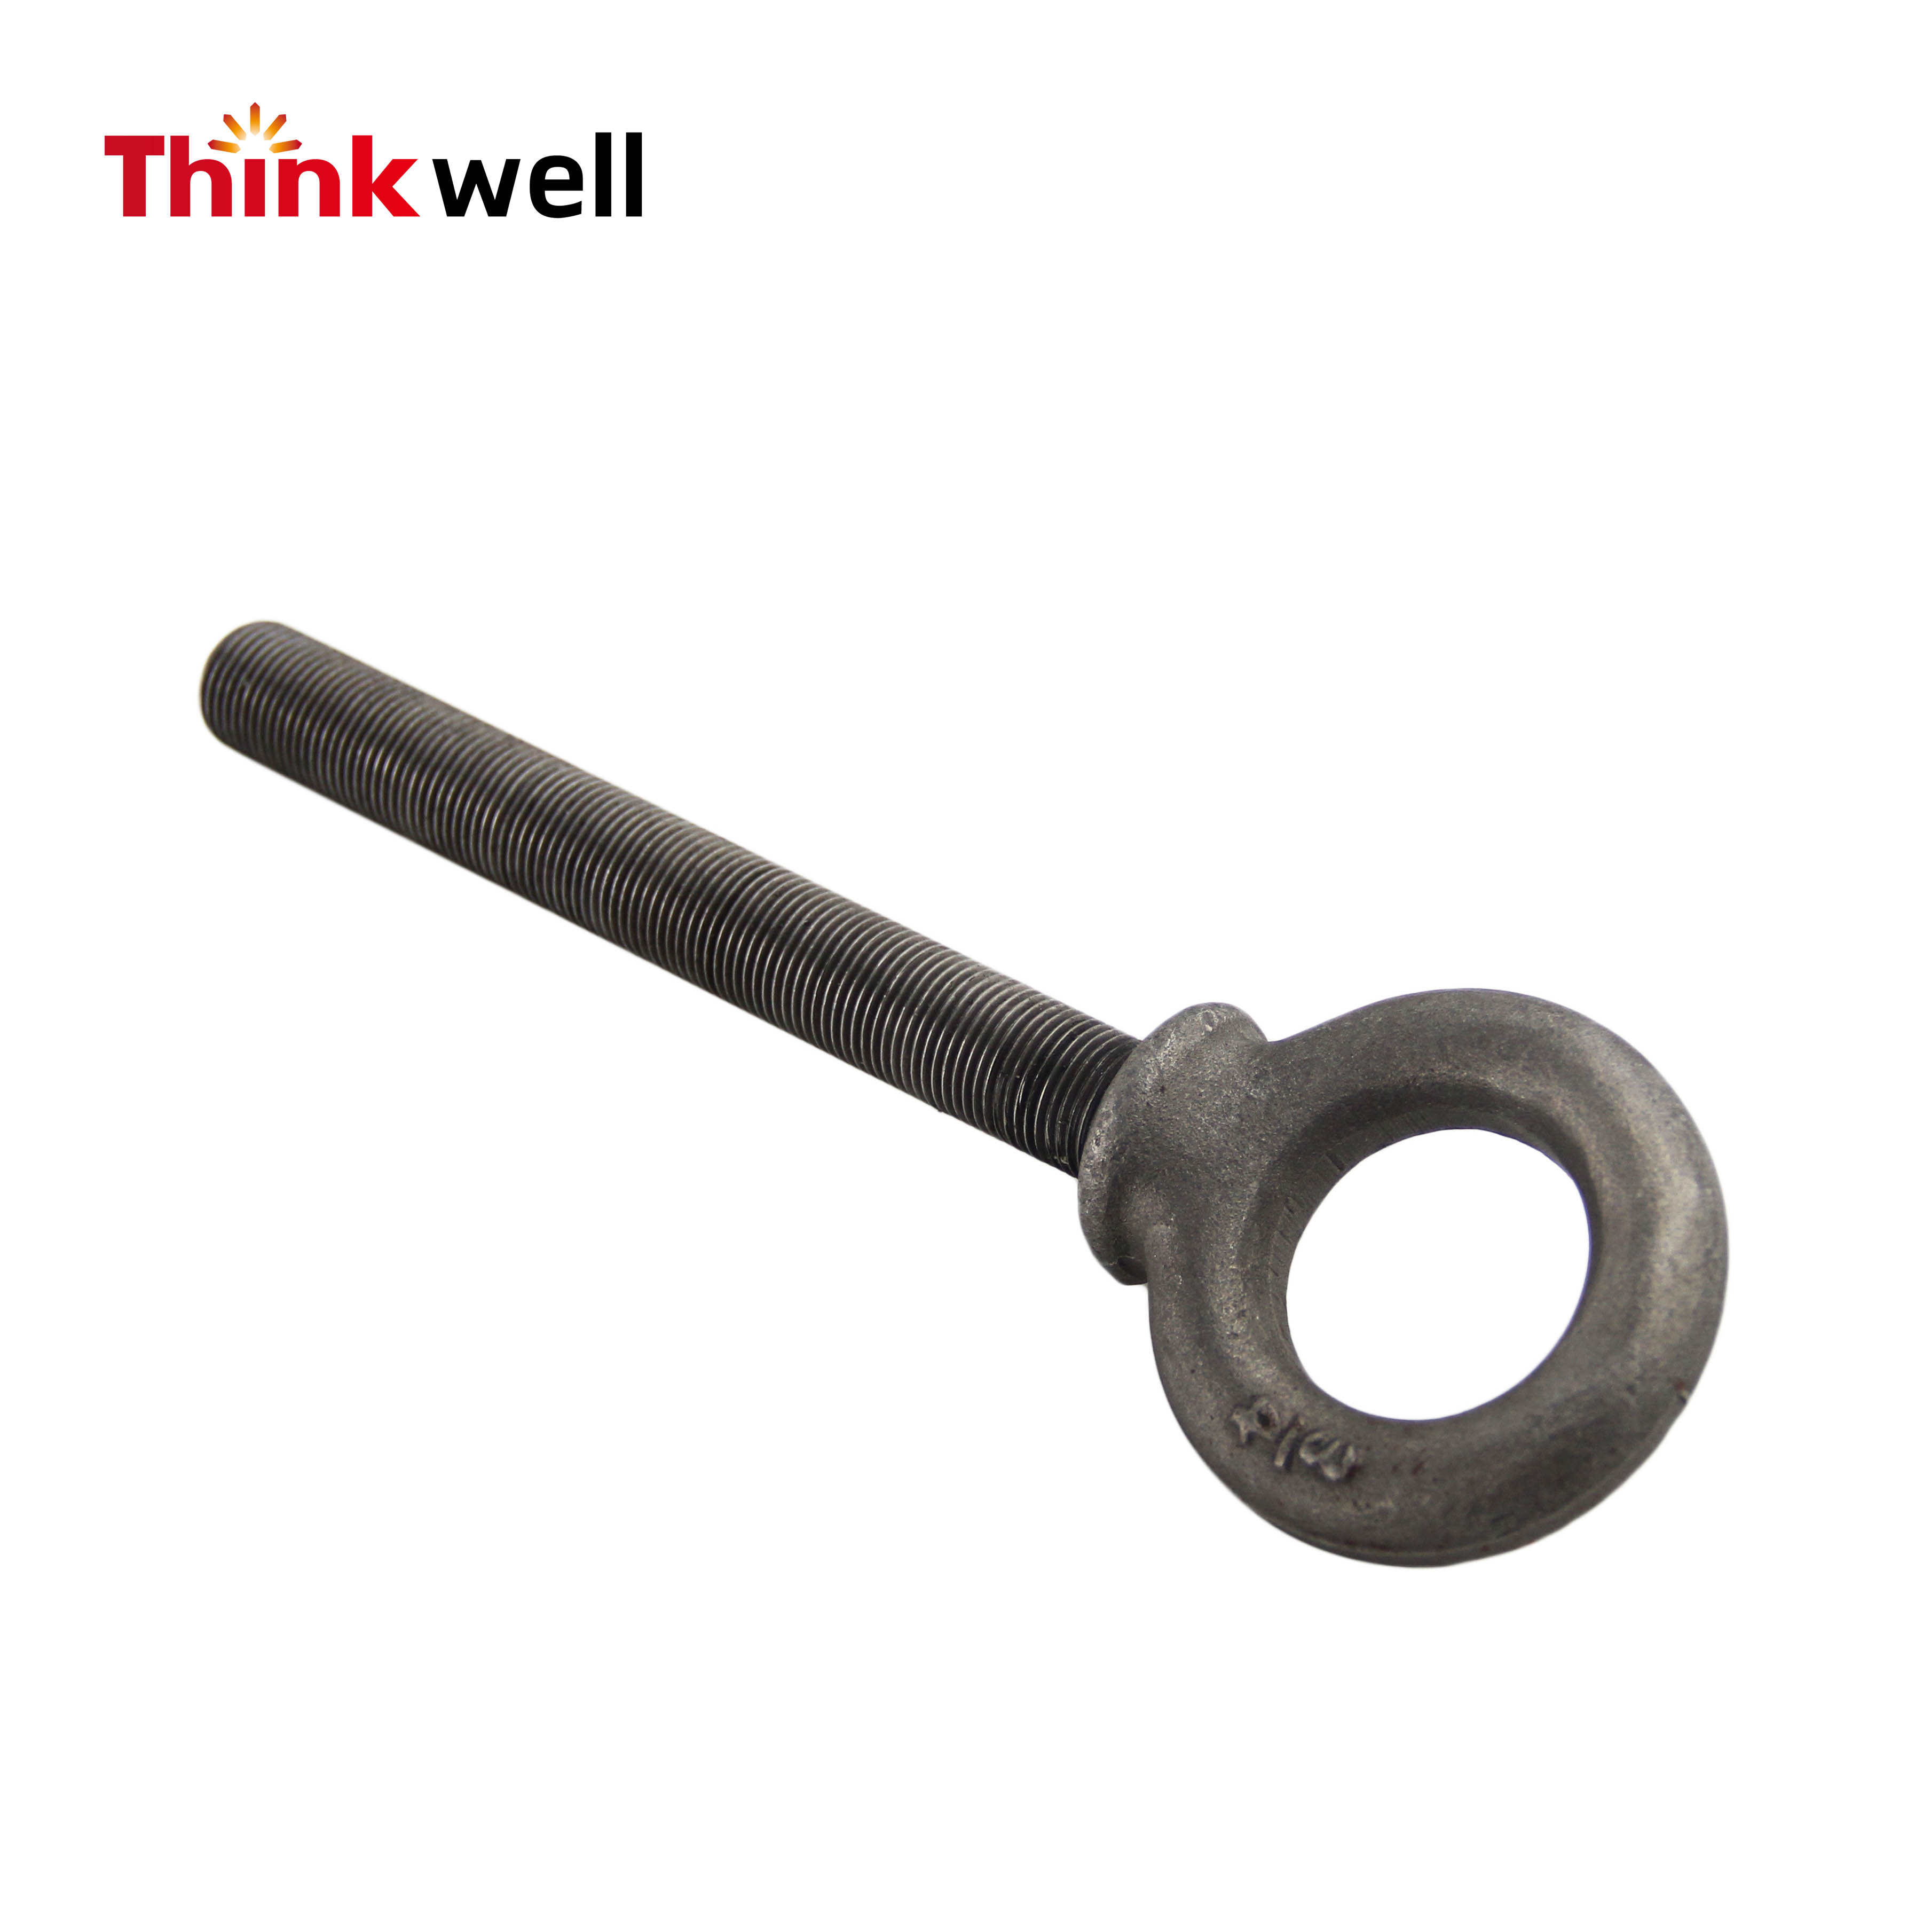 US Type Forged S279 Shoulder Type Machinery Eye Bolt 